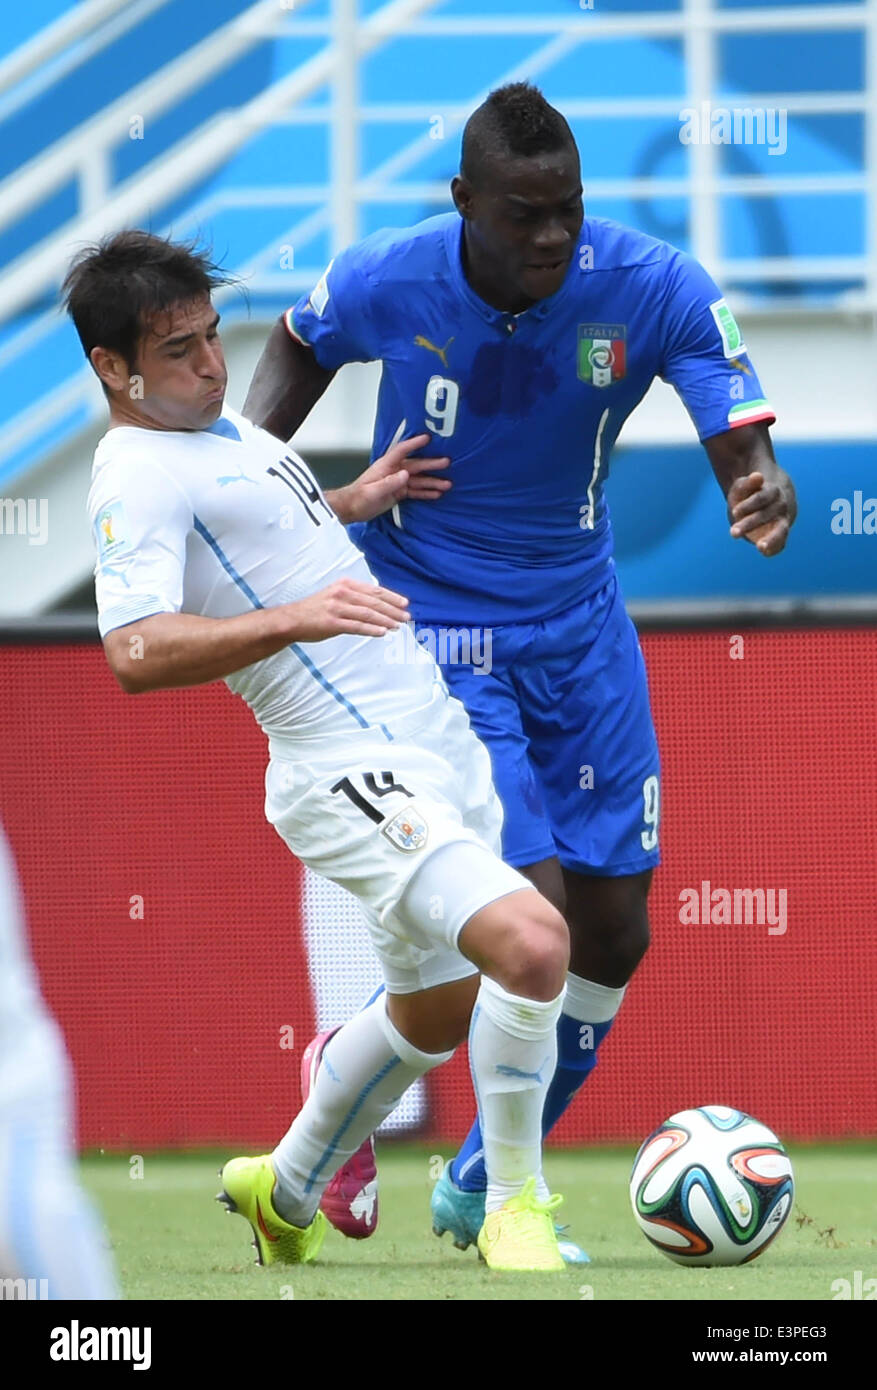 Natal, Brazil. 24th June, 2014. Italy's Mario Balotelli vies with Uruguay's Nicolas Lodeiro during a Group D match between Italy and Uruguay of 2014 FIFA World Cup at the Estadio das Dunas Stadium in Natal, Brazil, June 24, 2014. © Guo Yong/Xinhua/Alamy Live News Stock Photo